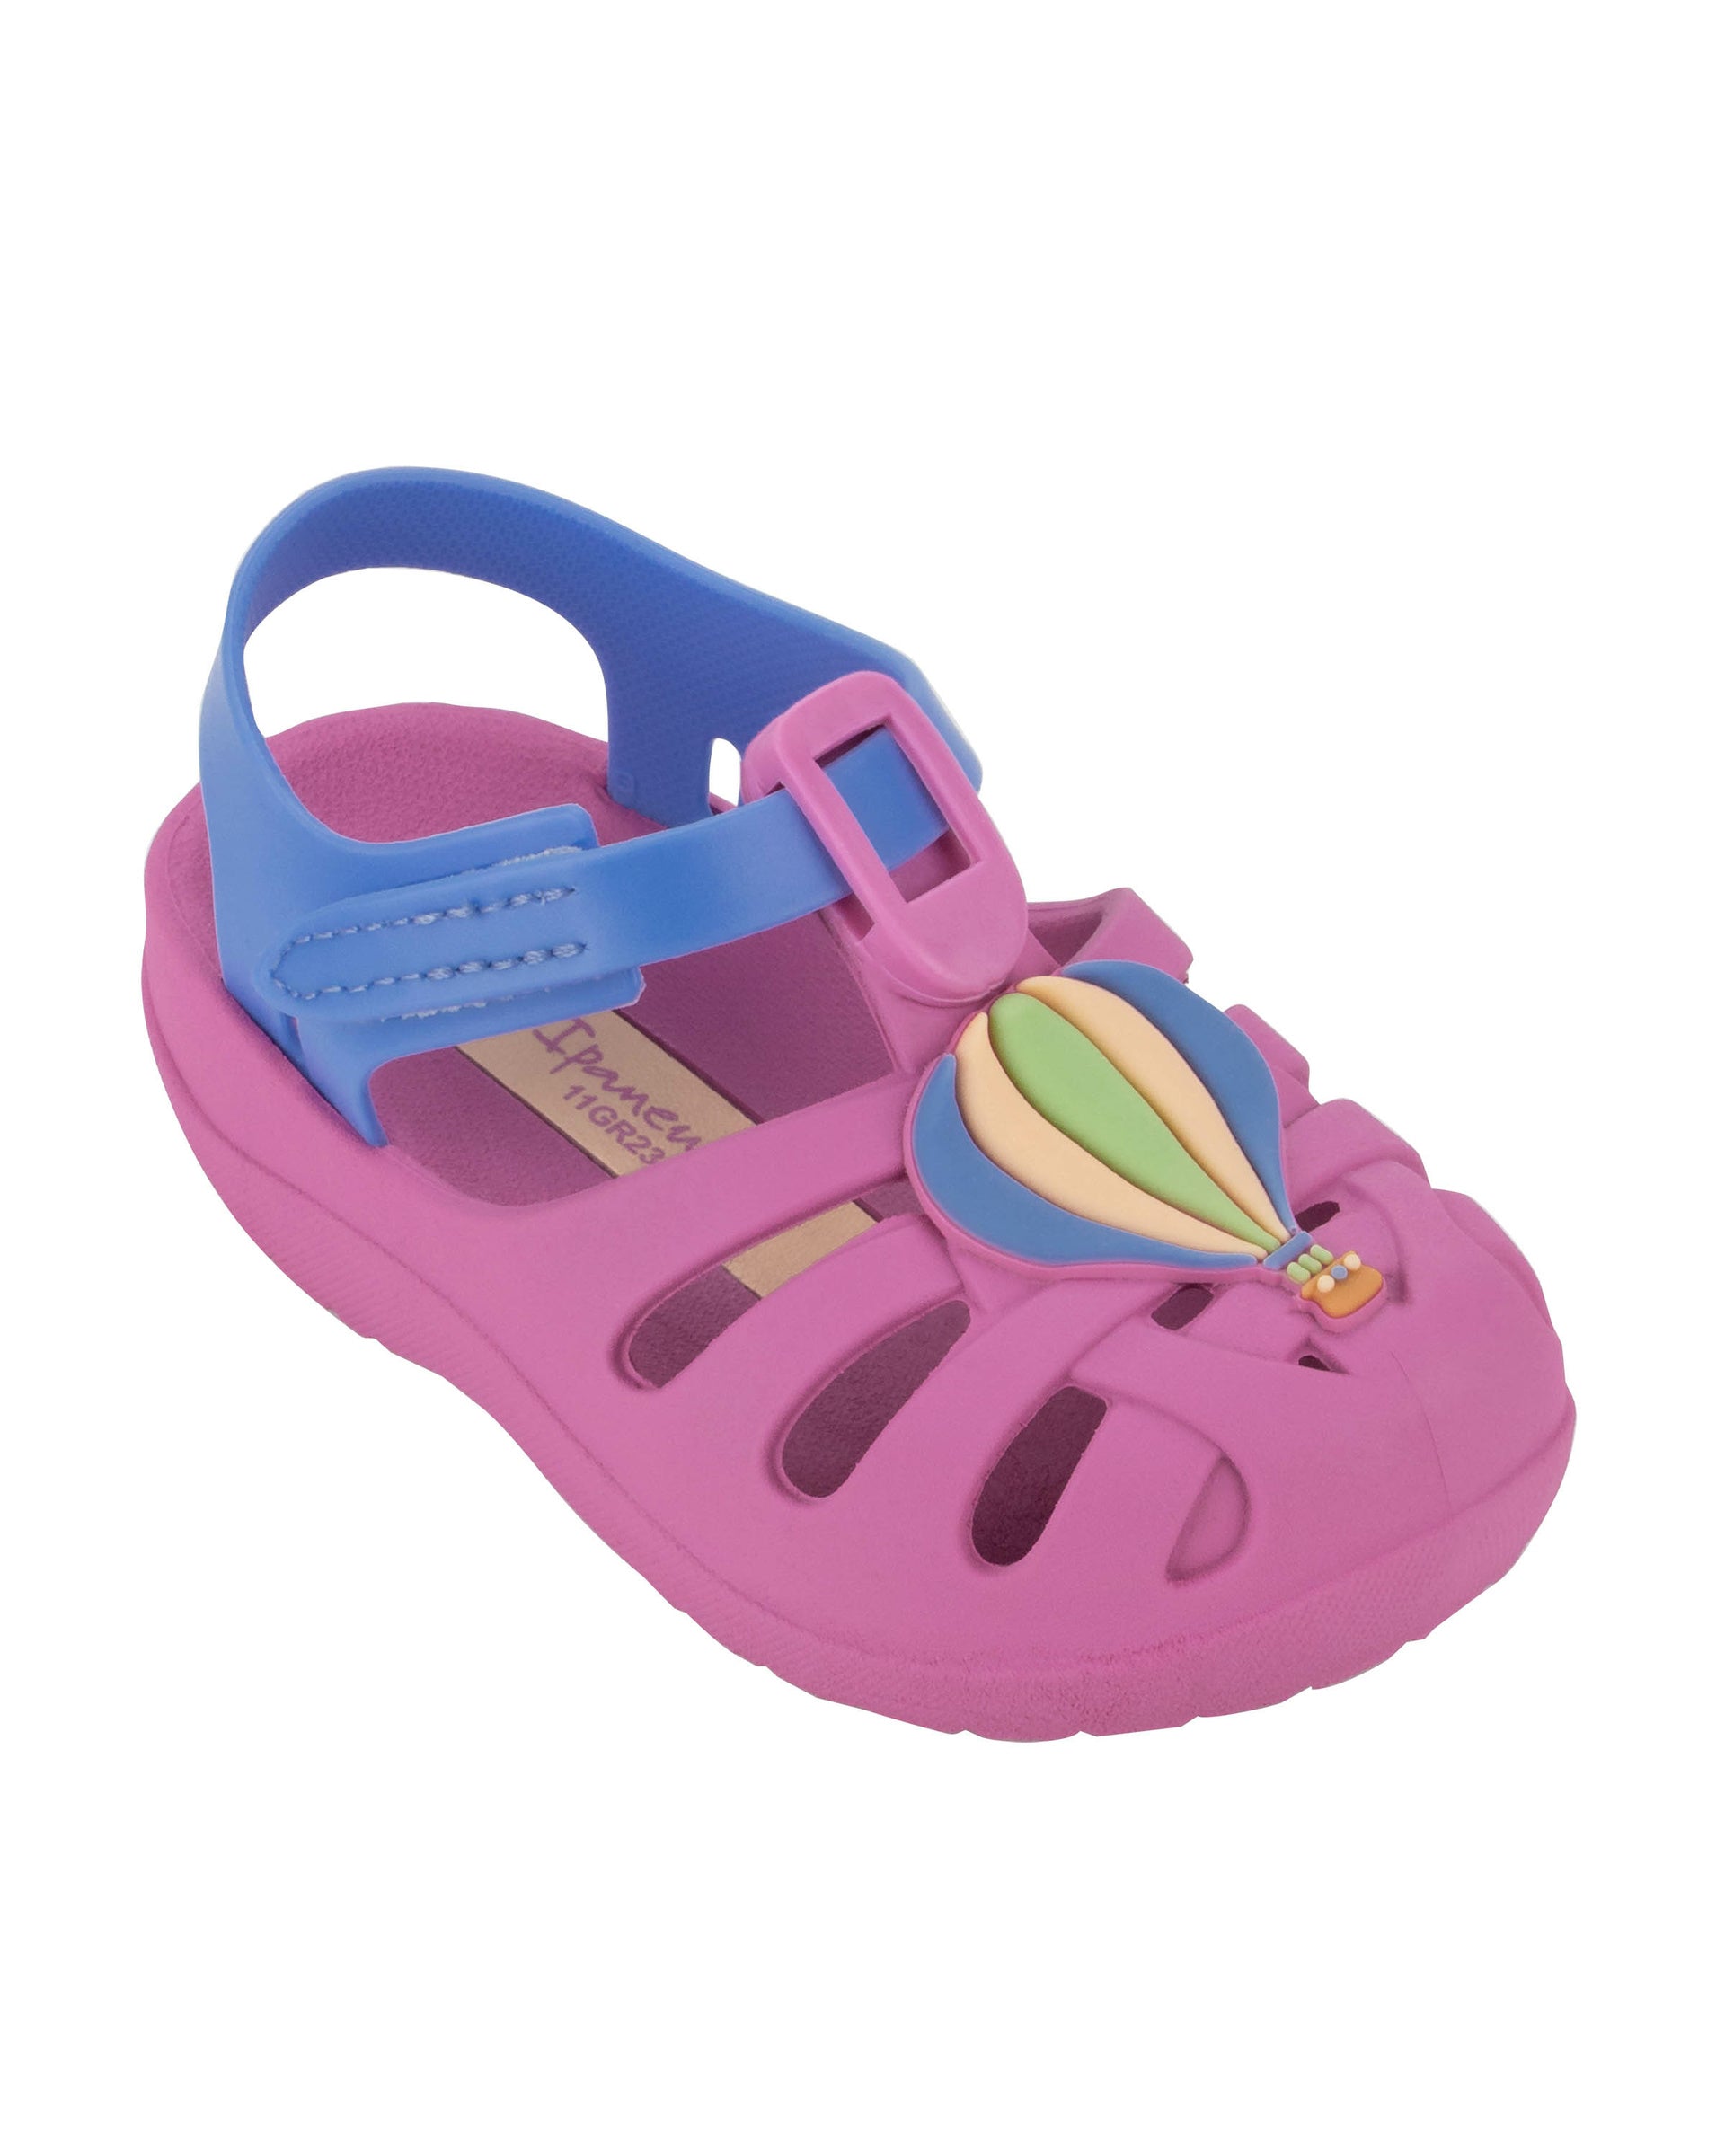 Angled view of a purple Ipanema Summer baby sandal with hot air balloon on the upper.